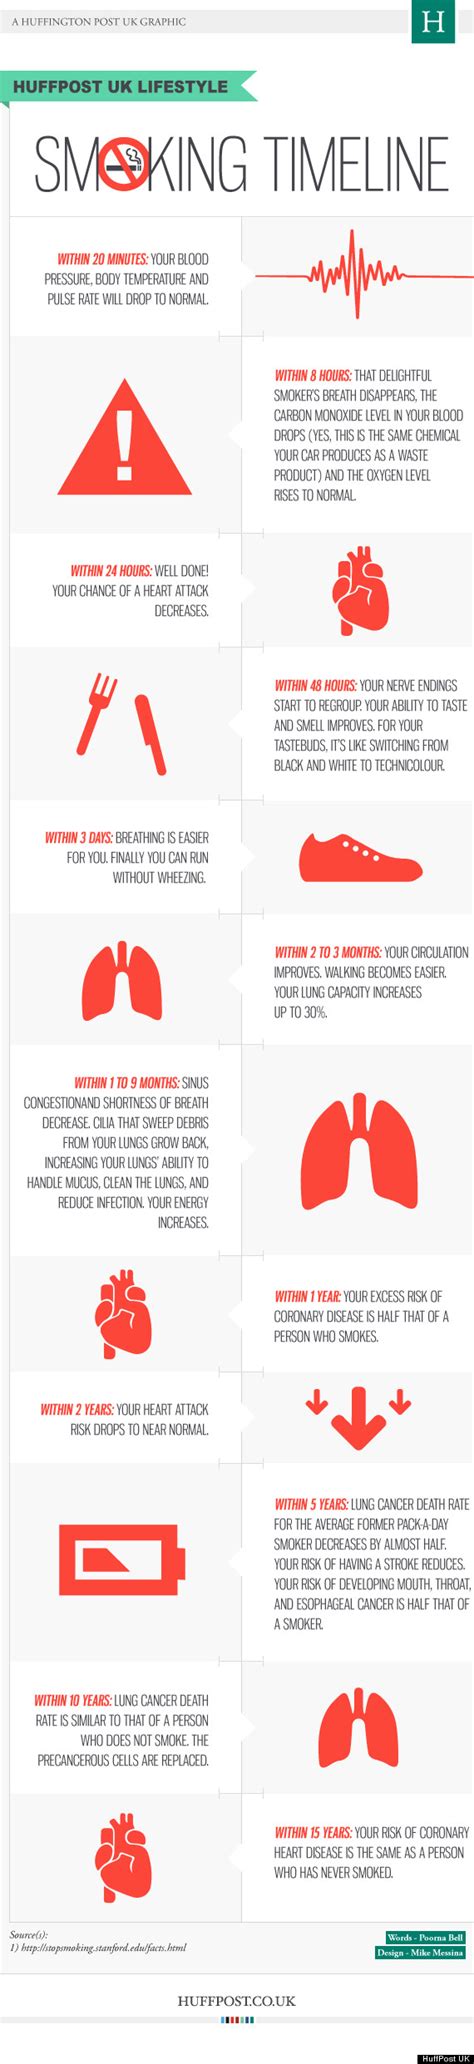 stoptober what happens to your body when you quit smoking huffpost uk